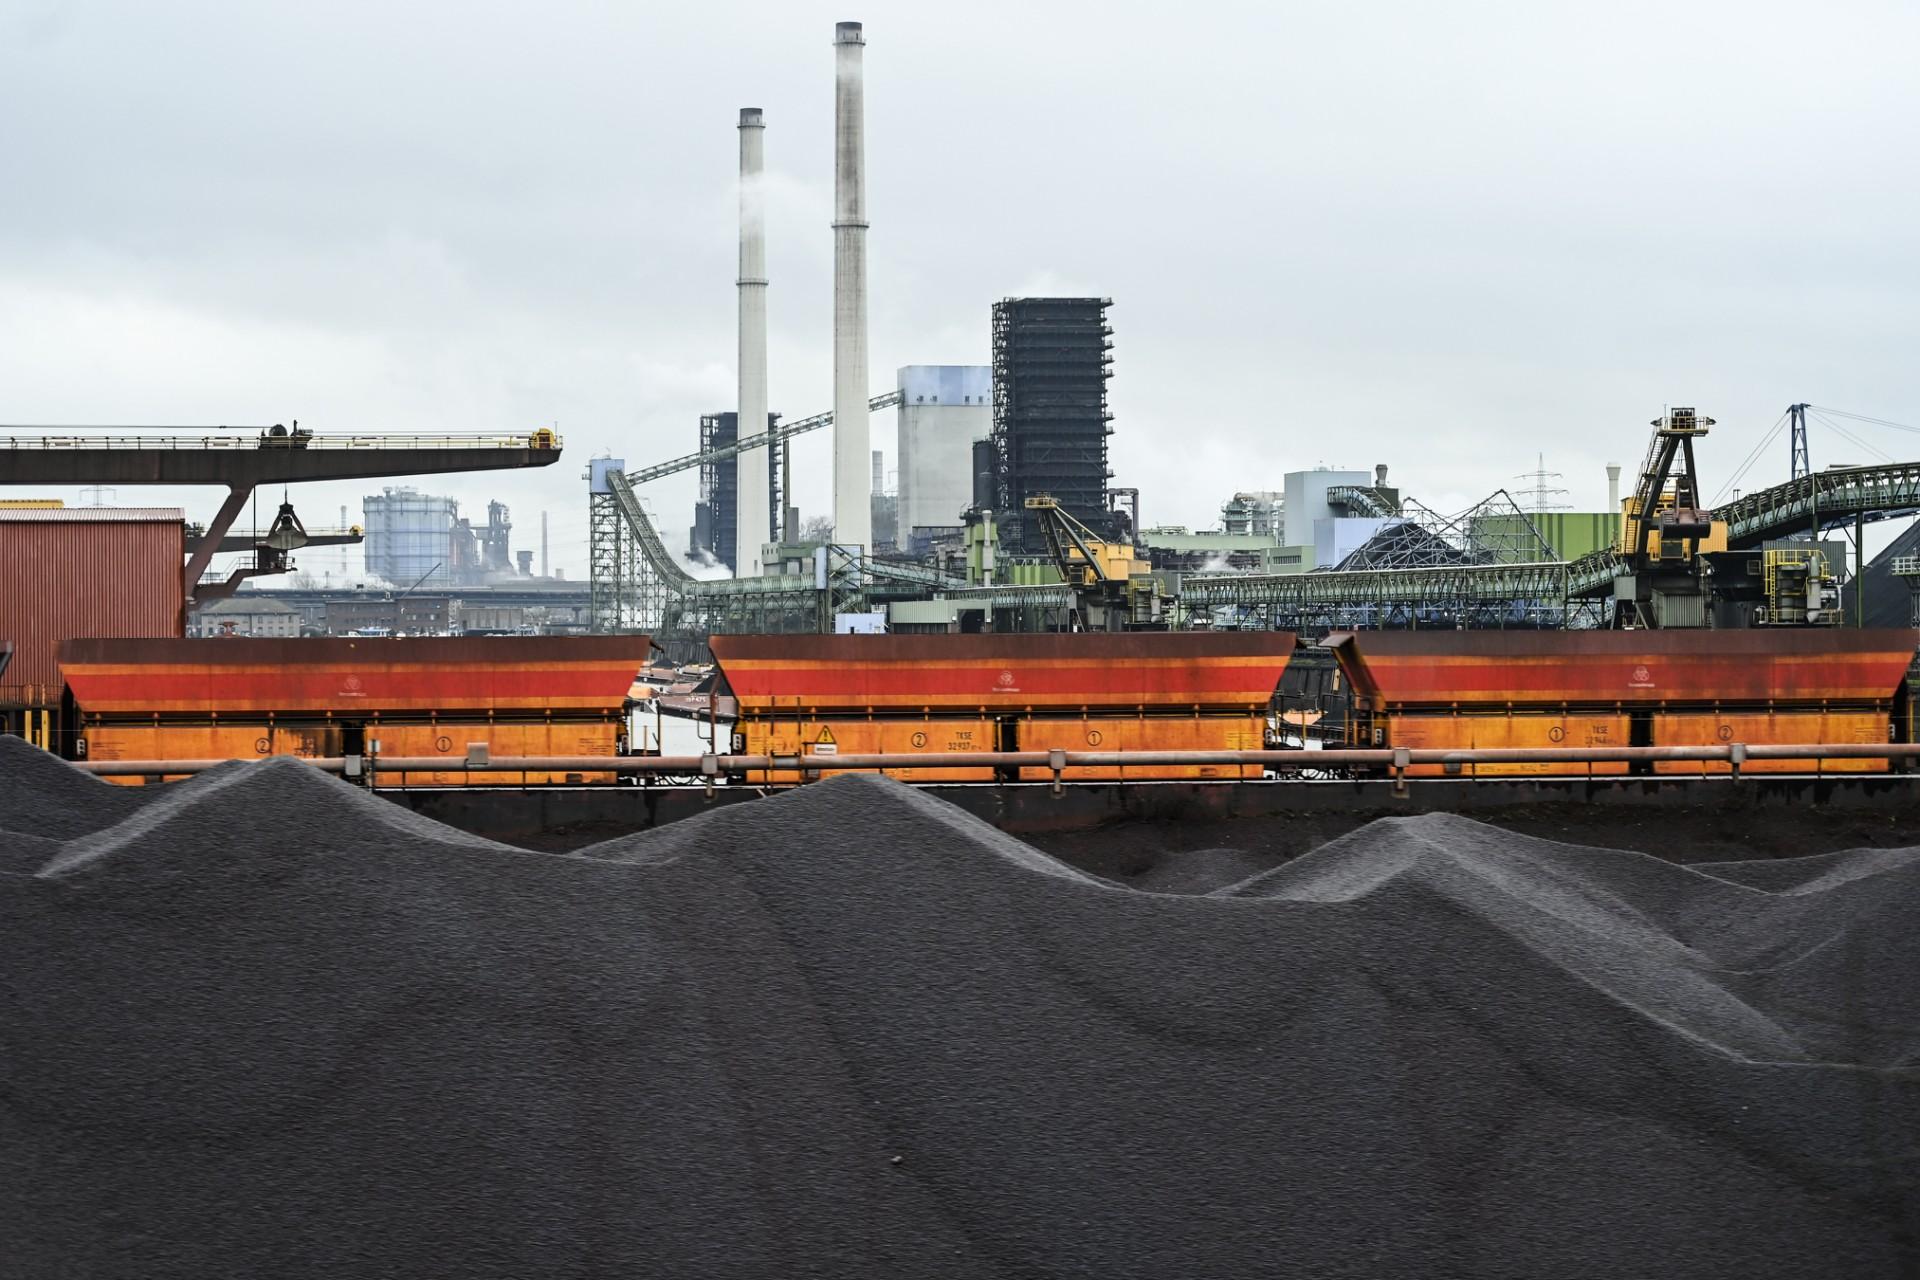 Coal stocks are seen at the Thyssenkrupp Steel Europe AG in Duisburg, western Germany on Feb 22. Photo: AFP